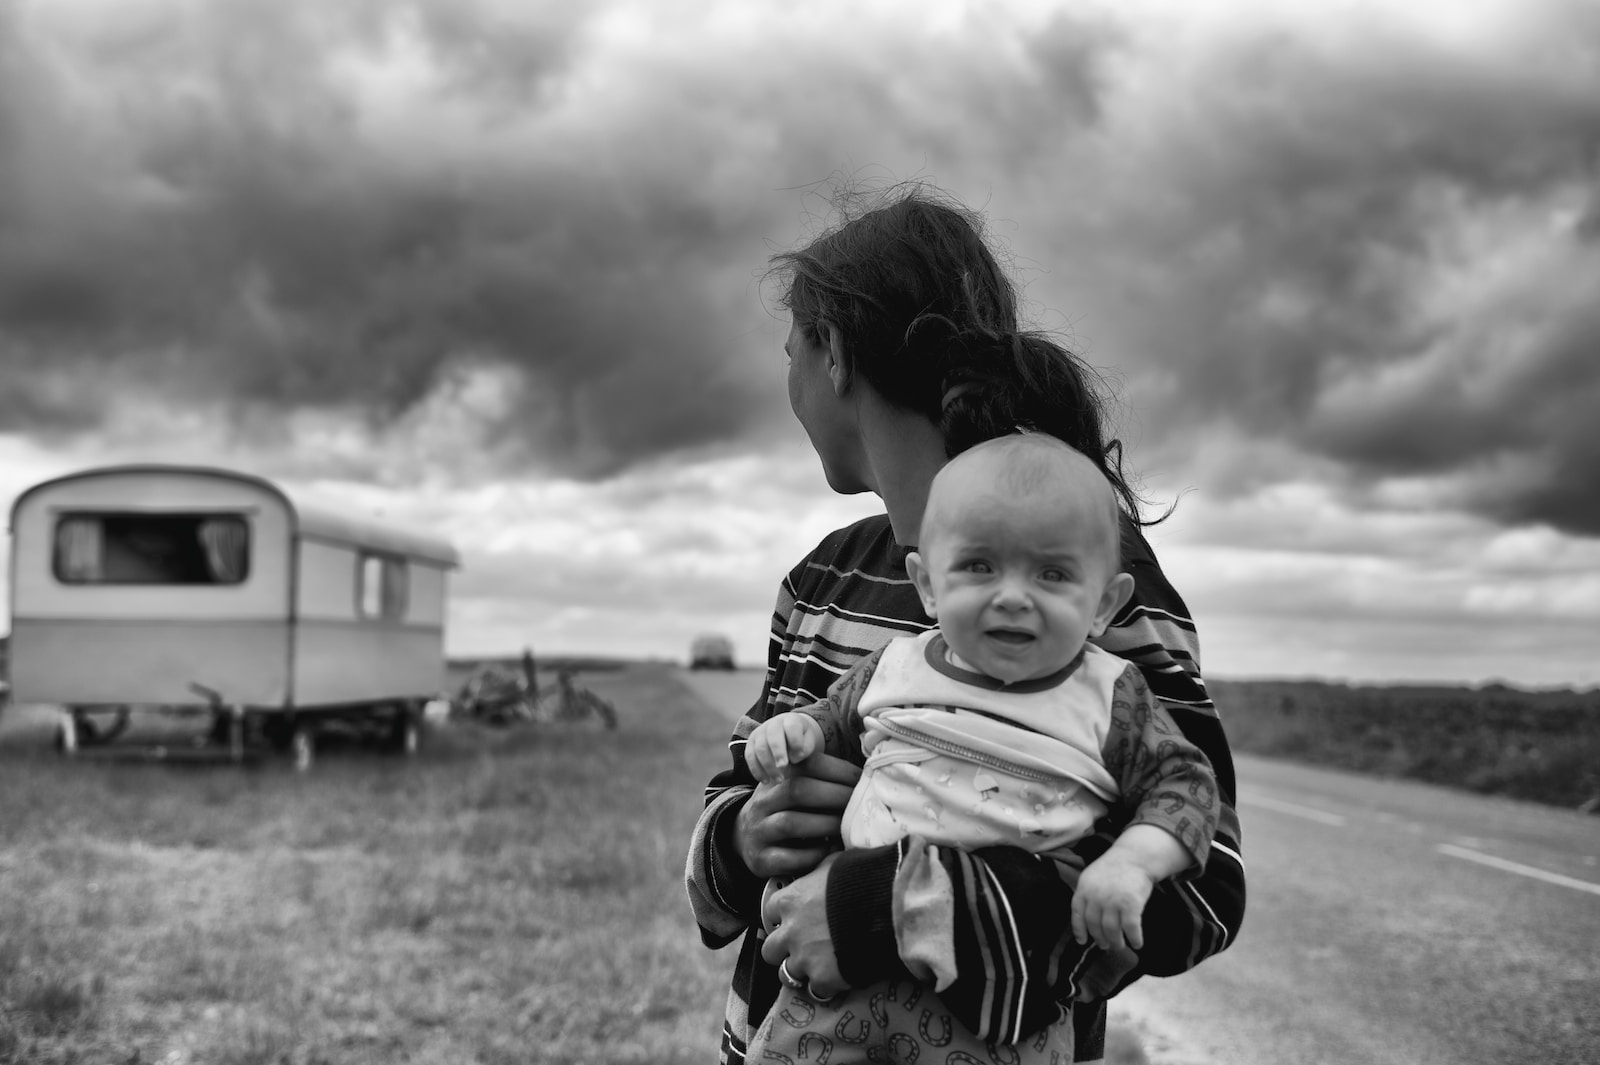 woman carrying baby looking at camper trailer